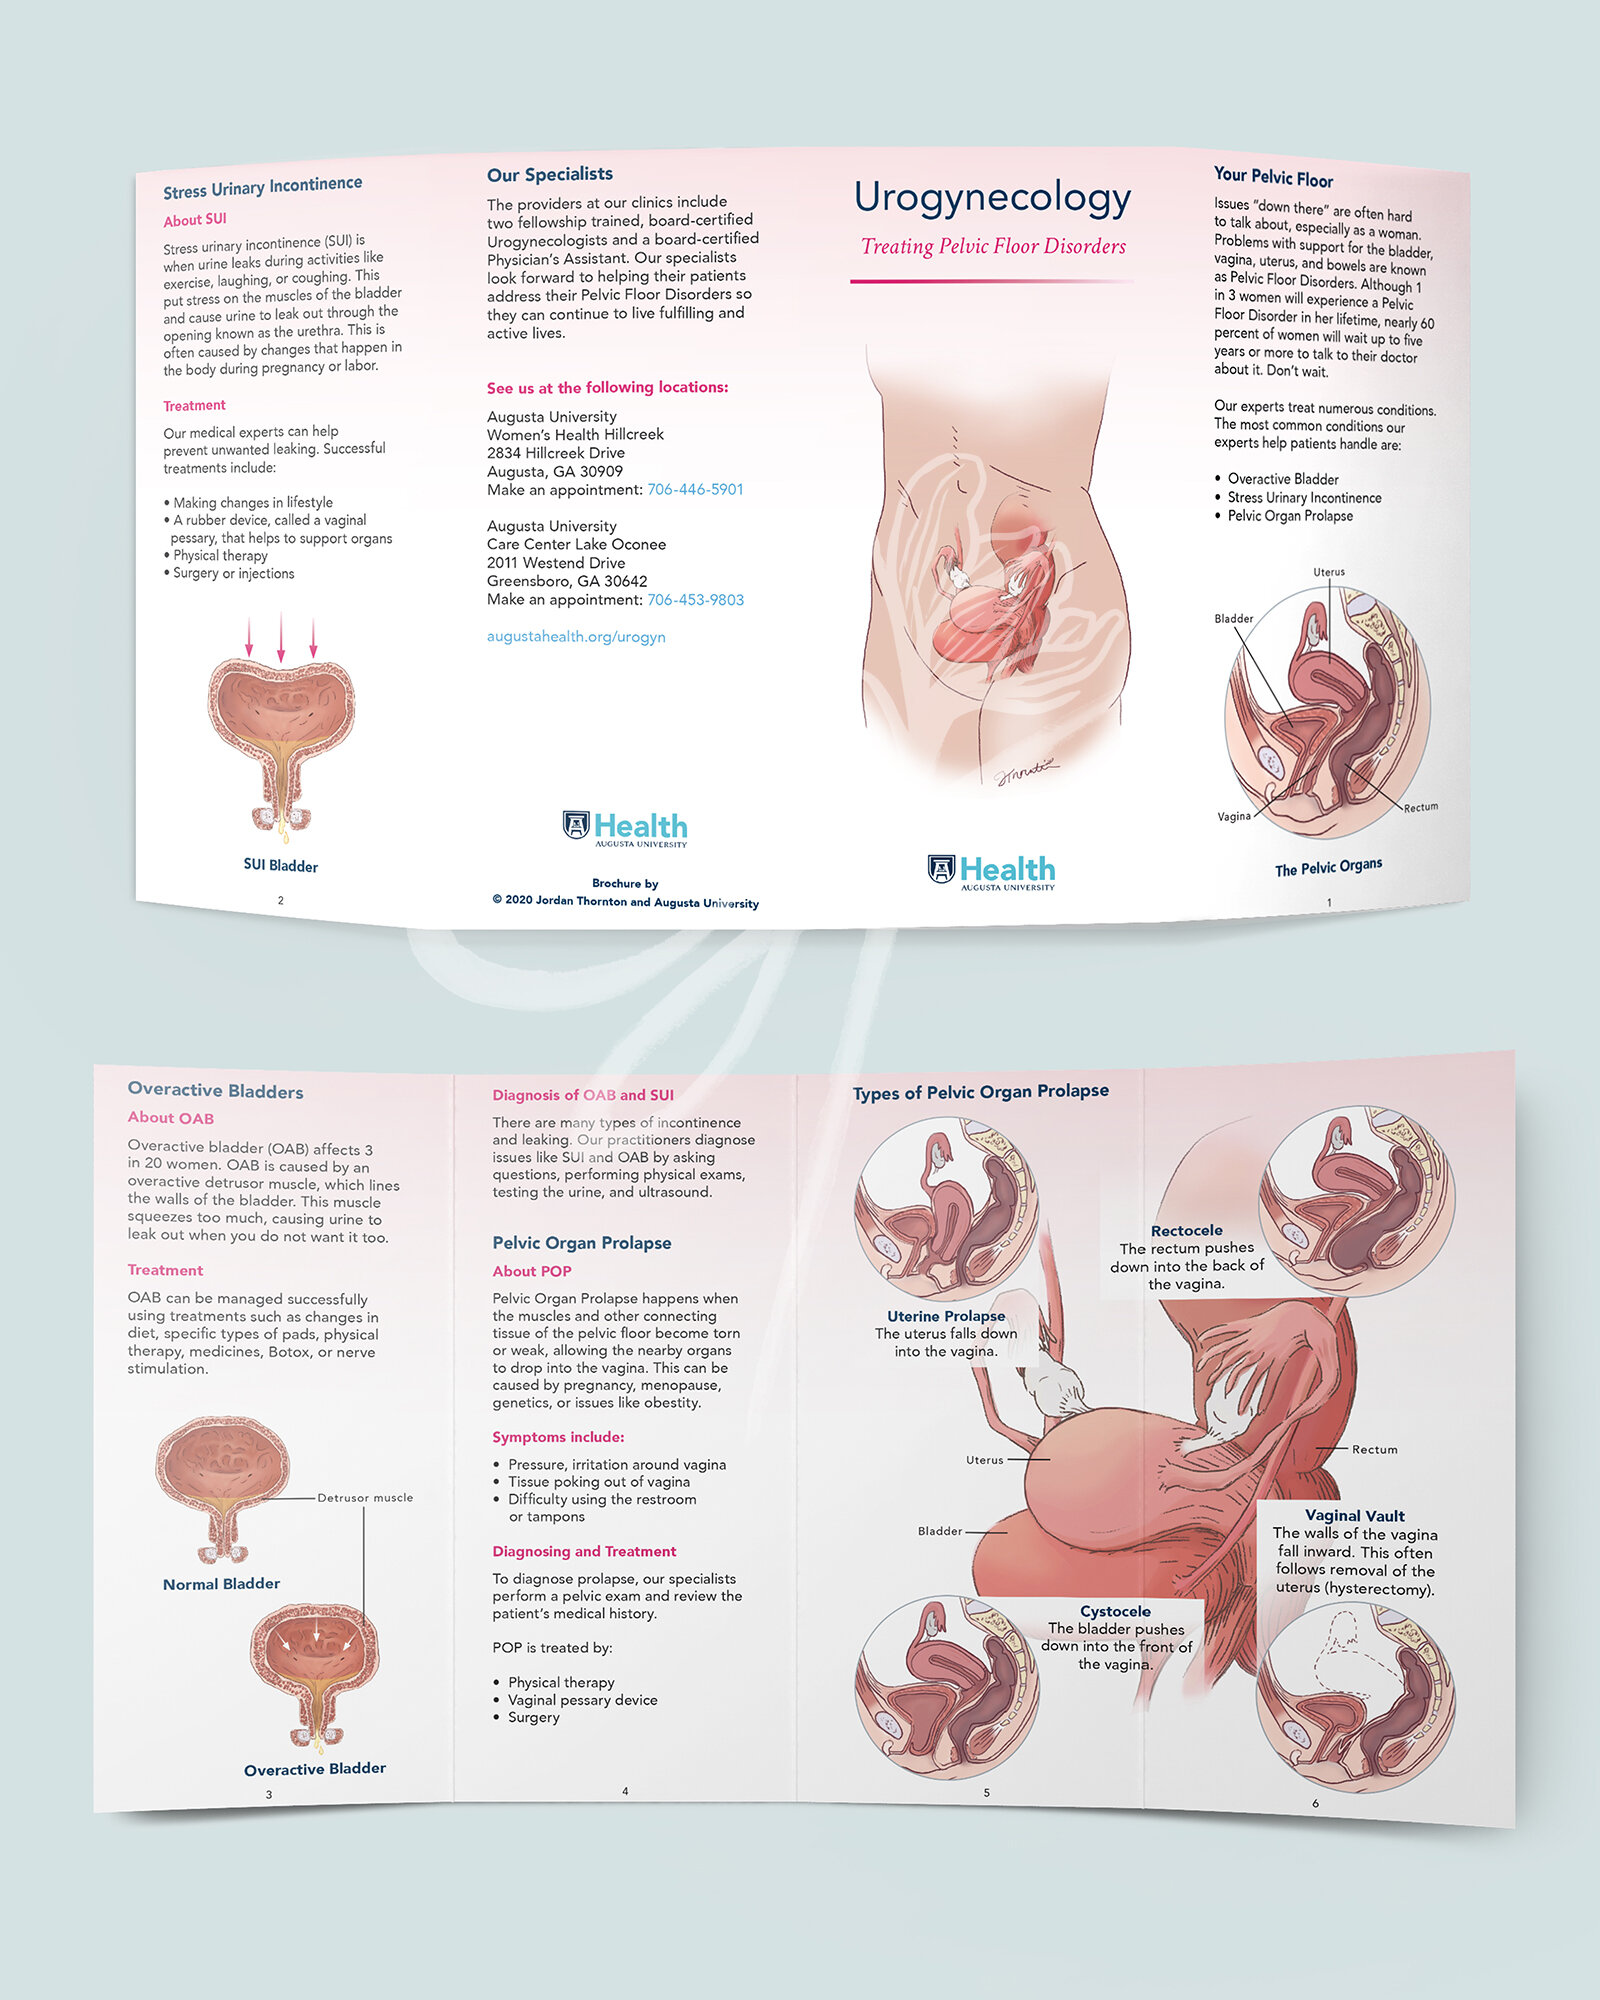   Medium:  Graphite, Photoshop, InDesign   Objective:  The goal of this design was to create an educational brochure that the audience finds reassuring, empowering, and easy to understand. The brochure primarily targets women over 40 from all socioec